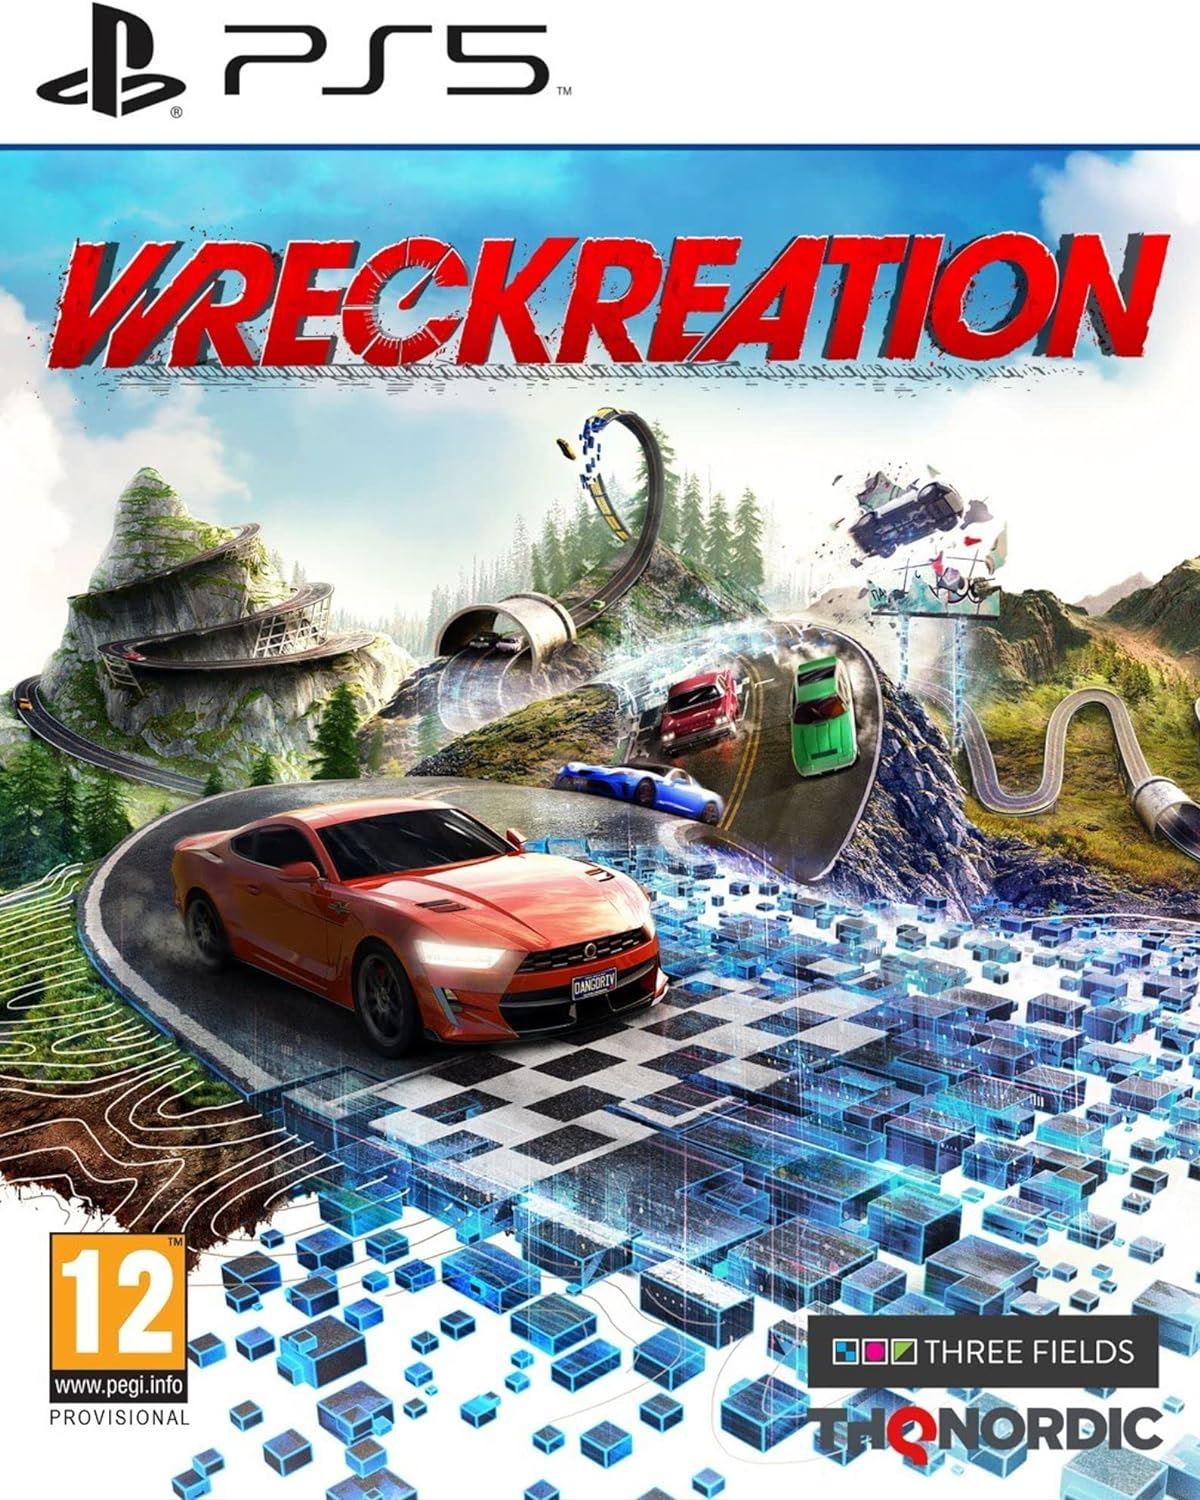 Wreckreation PS5 Game